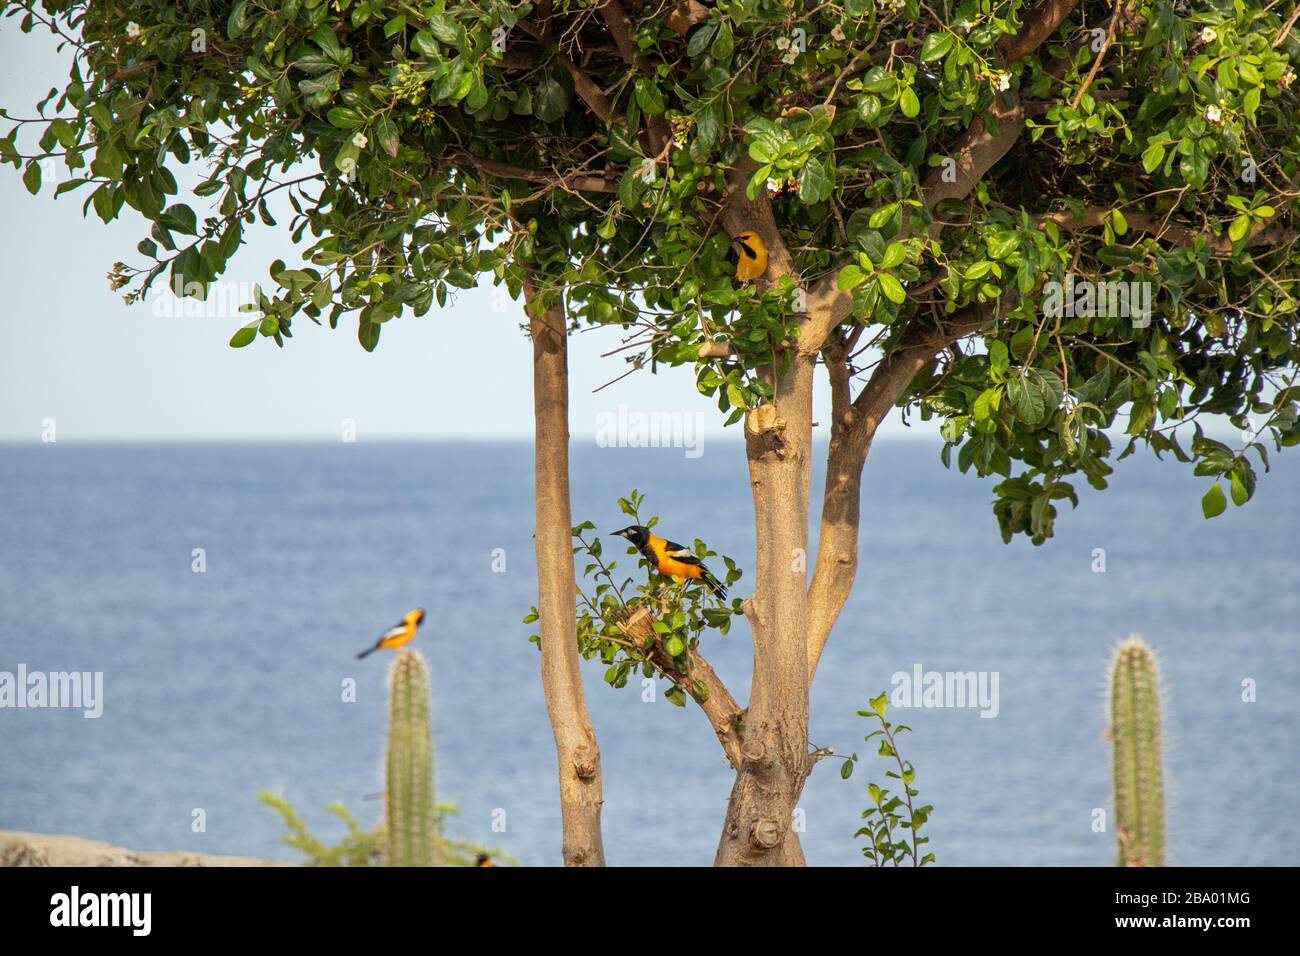 Venezuelan troupial sitting in a tree on Curacao Stock Photo